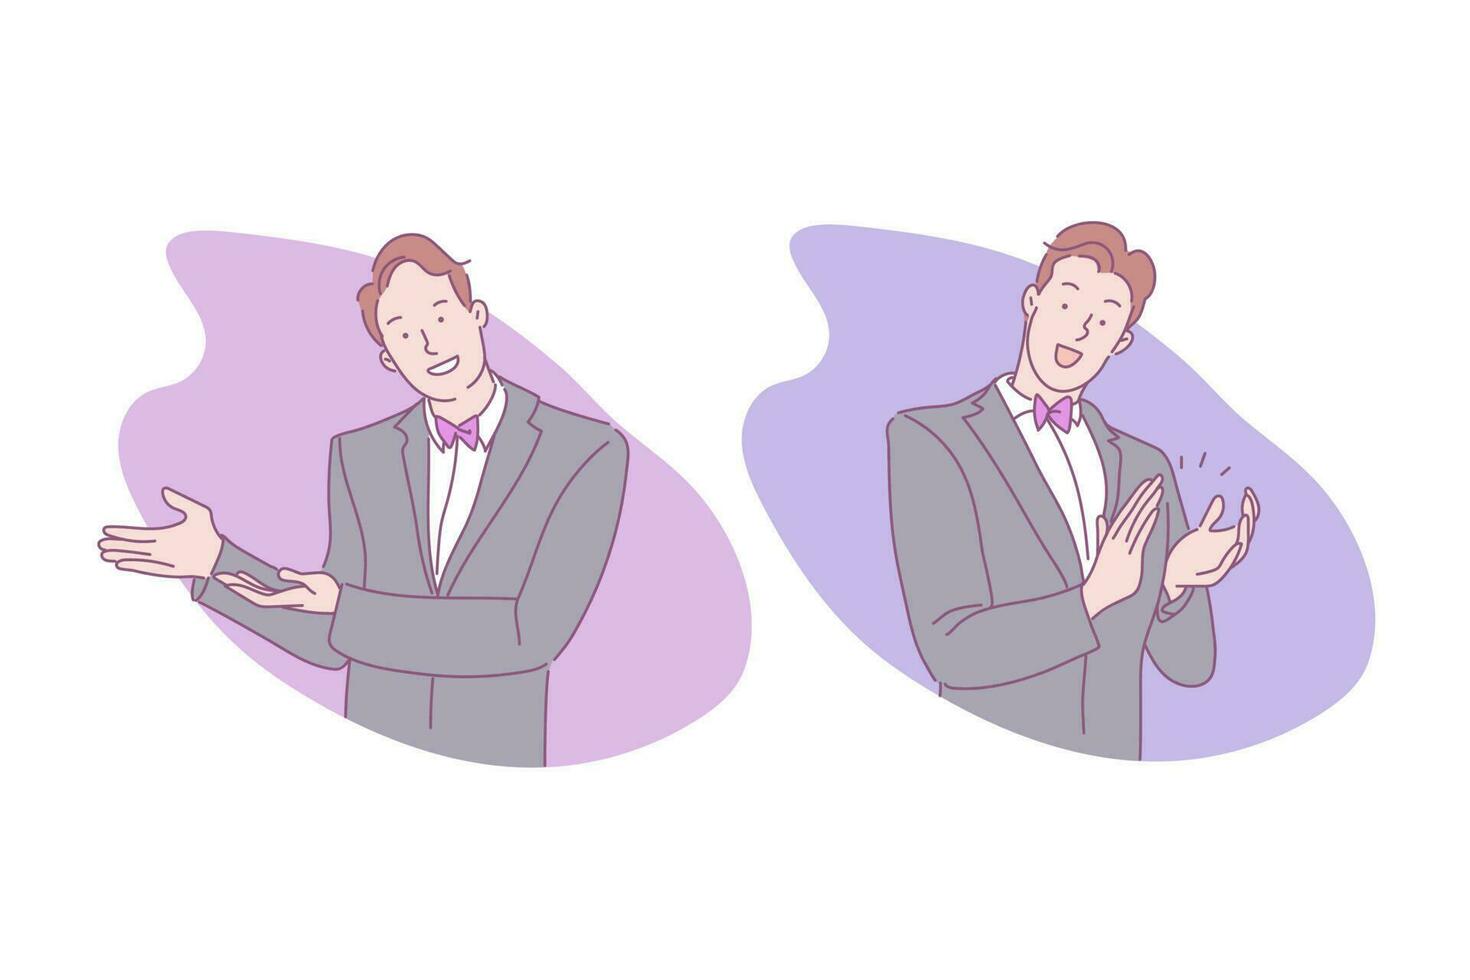 Sign language, invitation to enter, applause, handclap, cheering concept vector